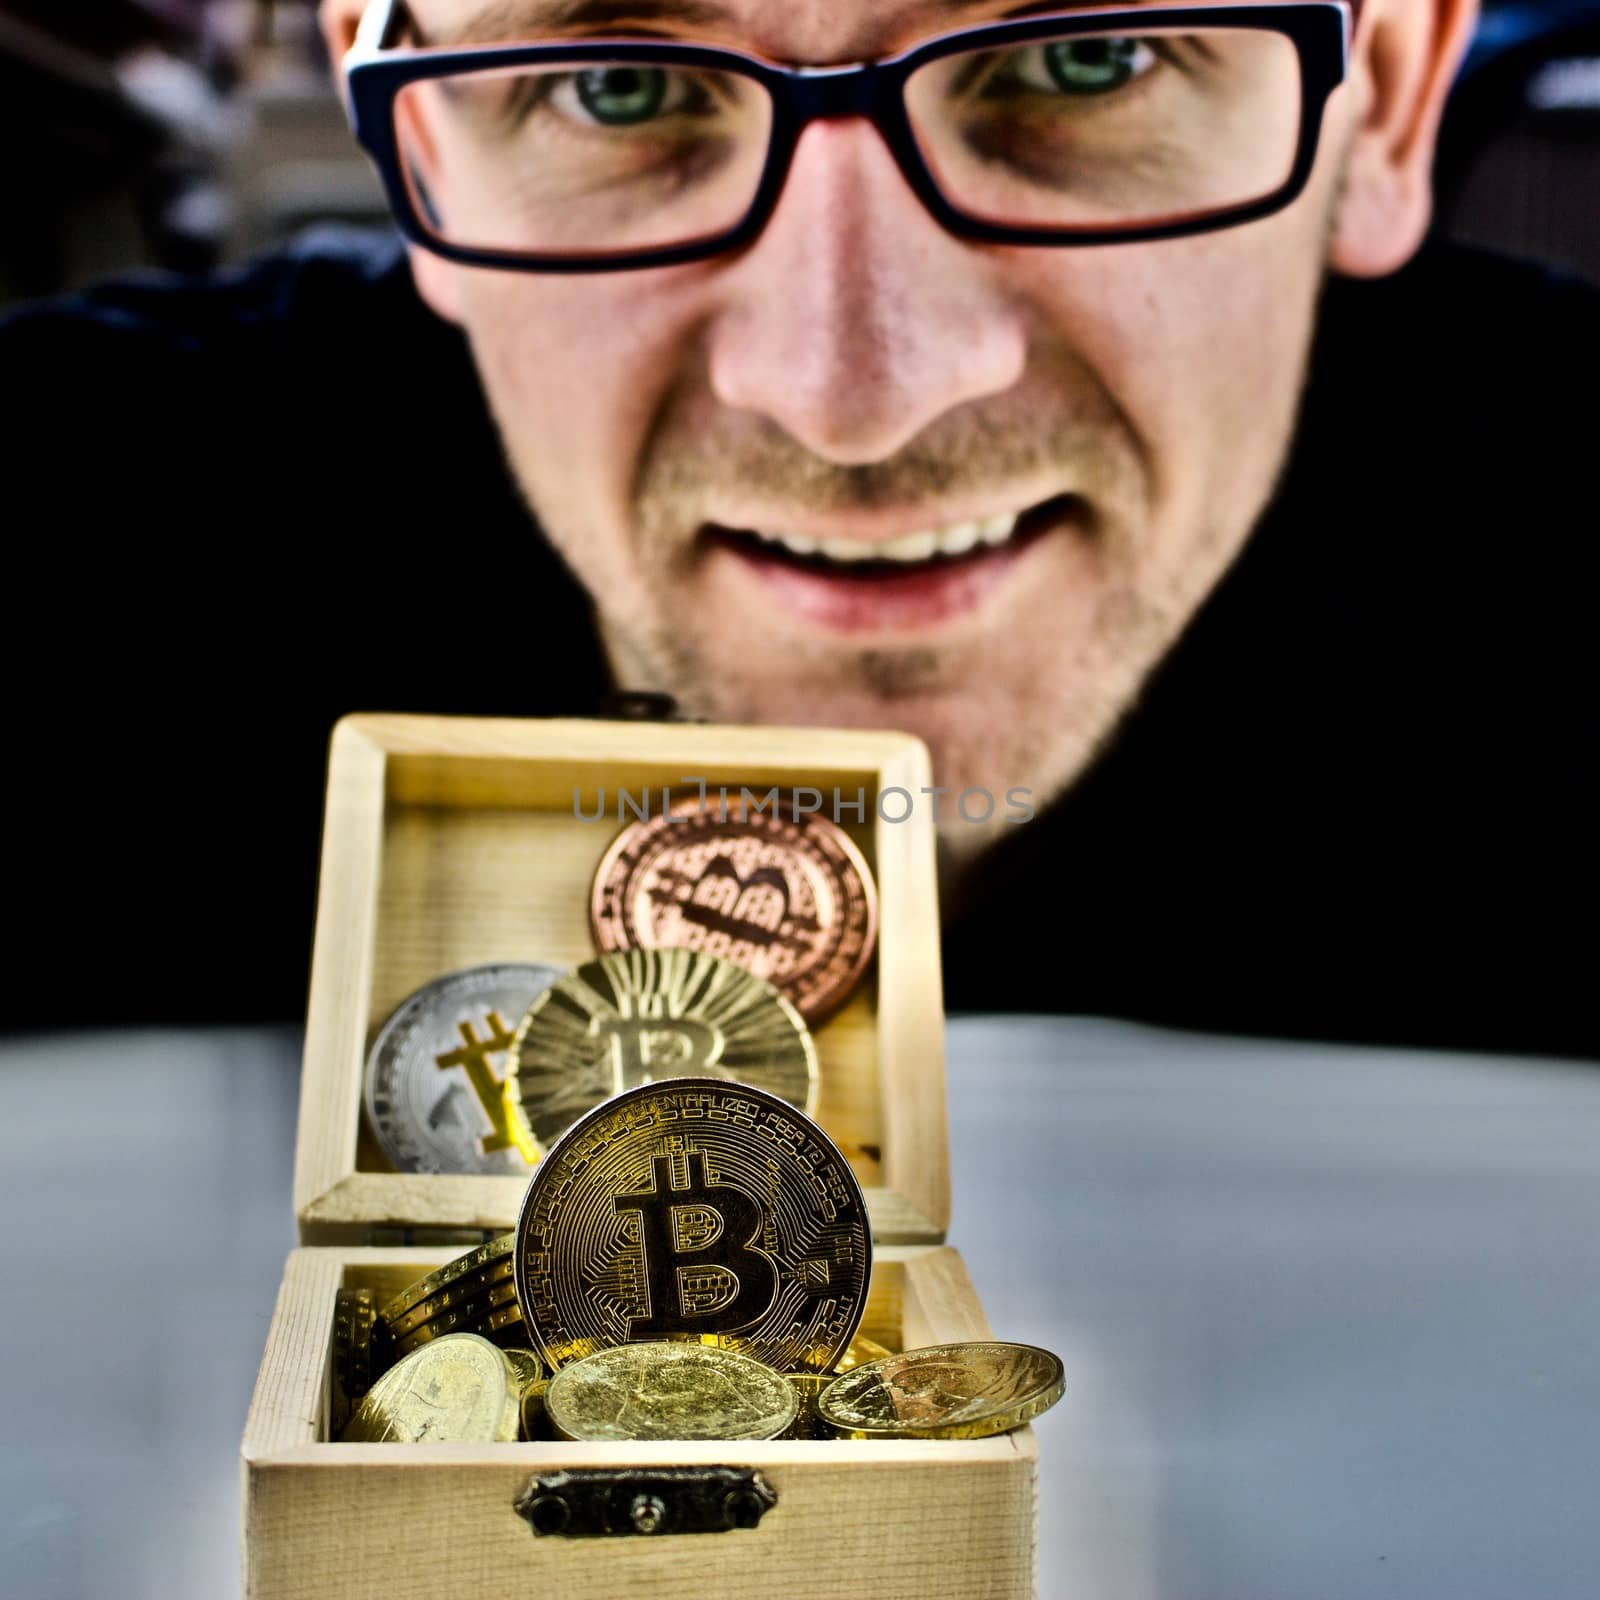 Cryptocurrency physical gold bitcoin coin and man in glasses